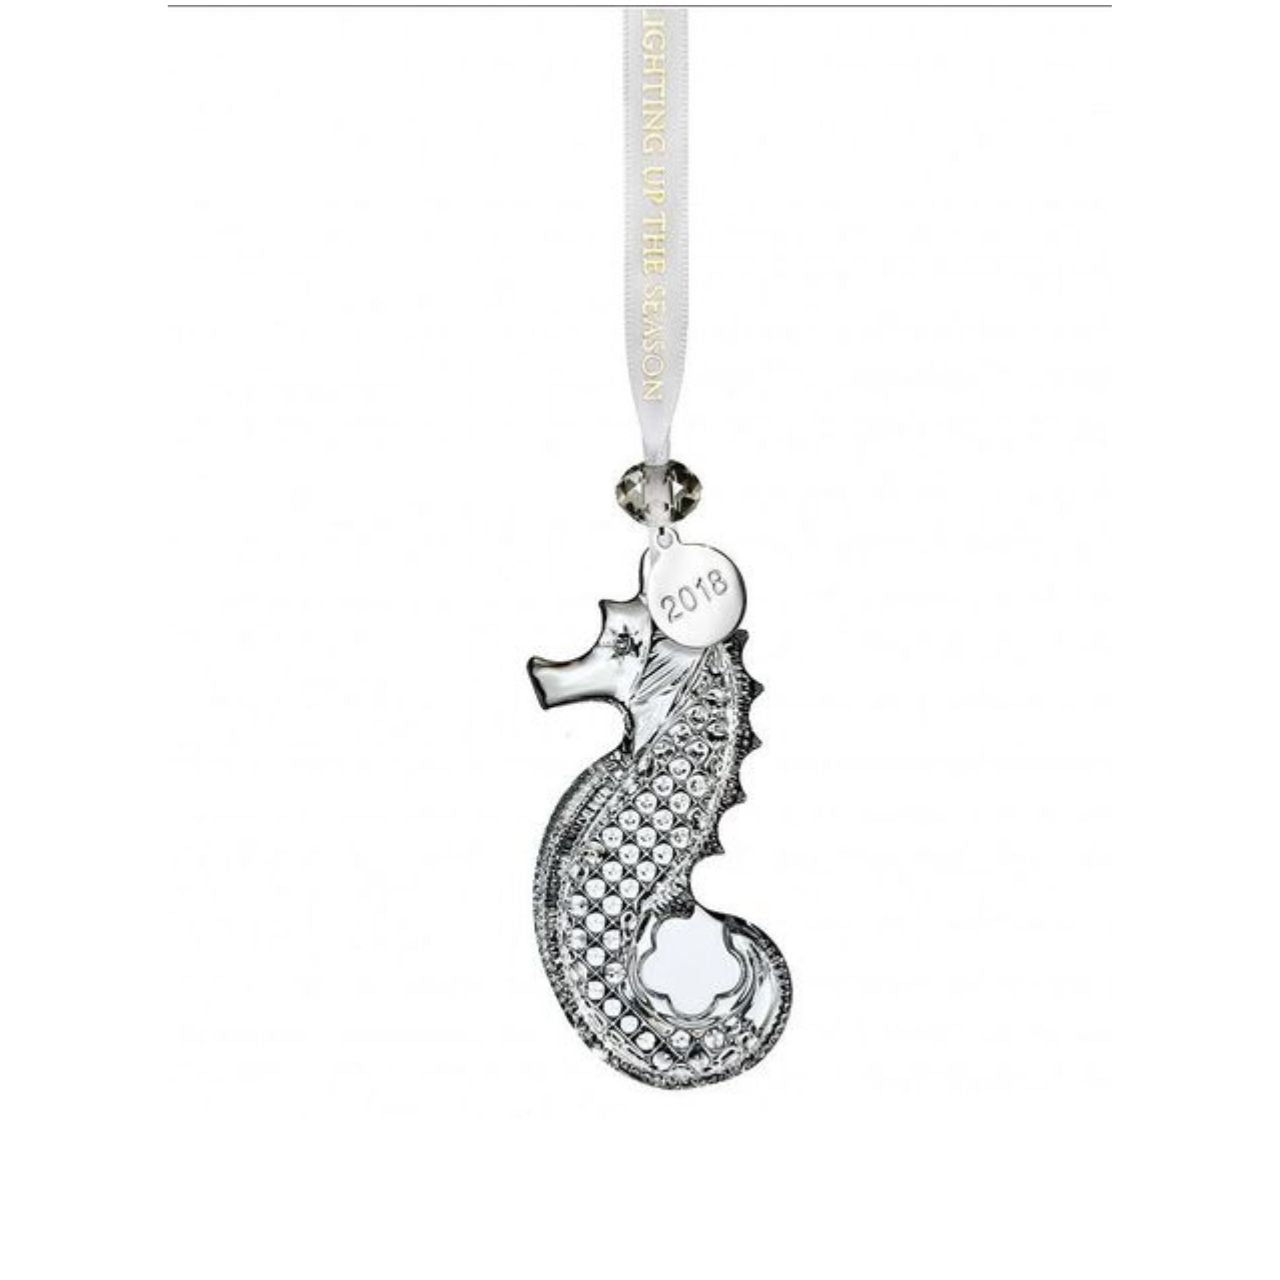 Waterford Crystal Seahorse Christmas Ornament 2018  The stunning 2018 Seahorse Clear Ornament is one of Waterford’s collectible crystal ornaments intricately designed here with sparkling detail. In Celtic tradition the seahorse is a symbol of good luck at sea to allow for safe passage.